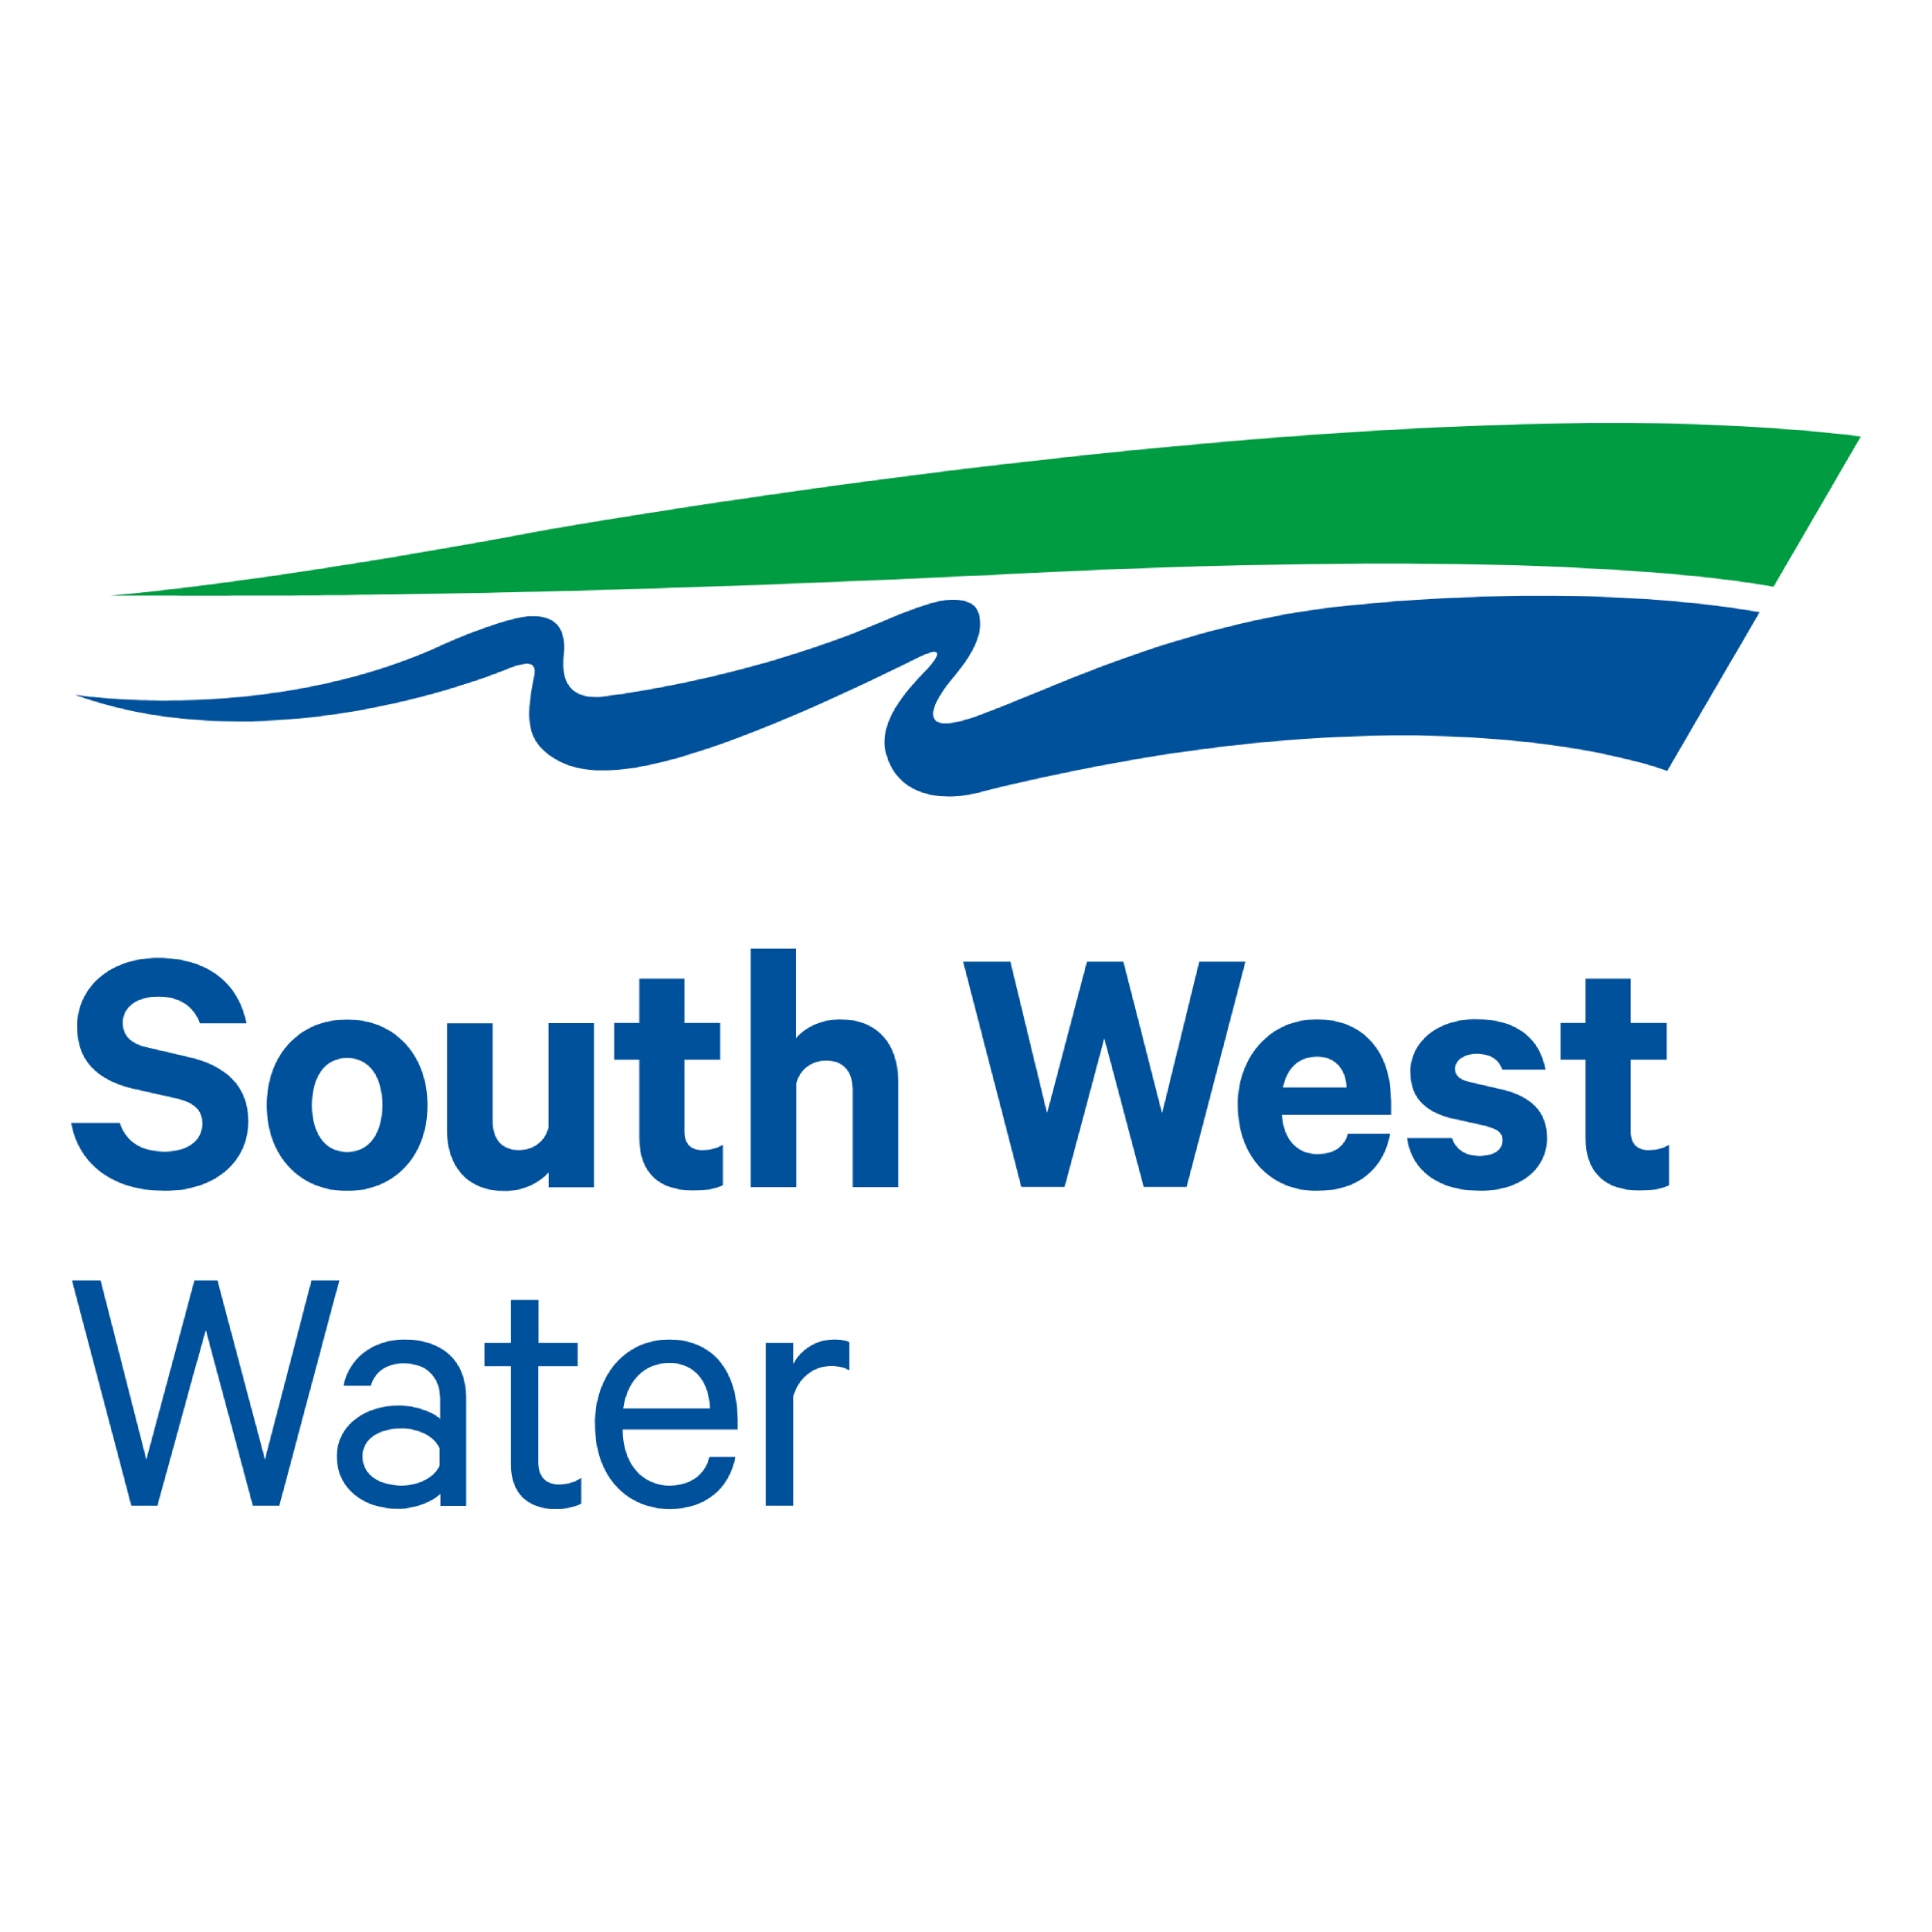 South West Water logo